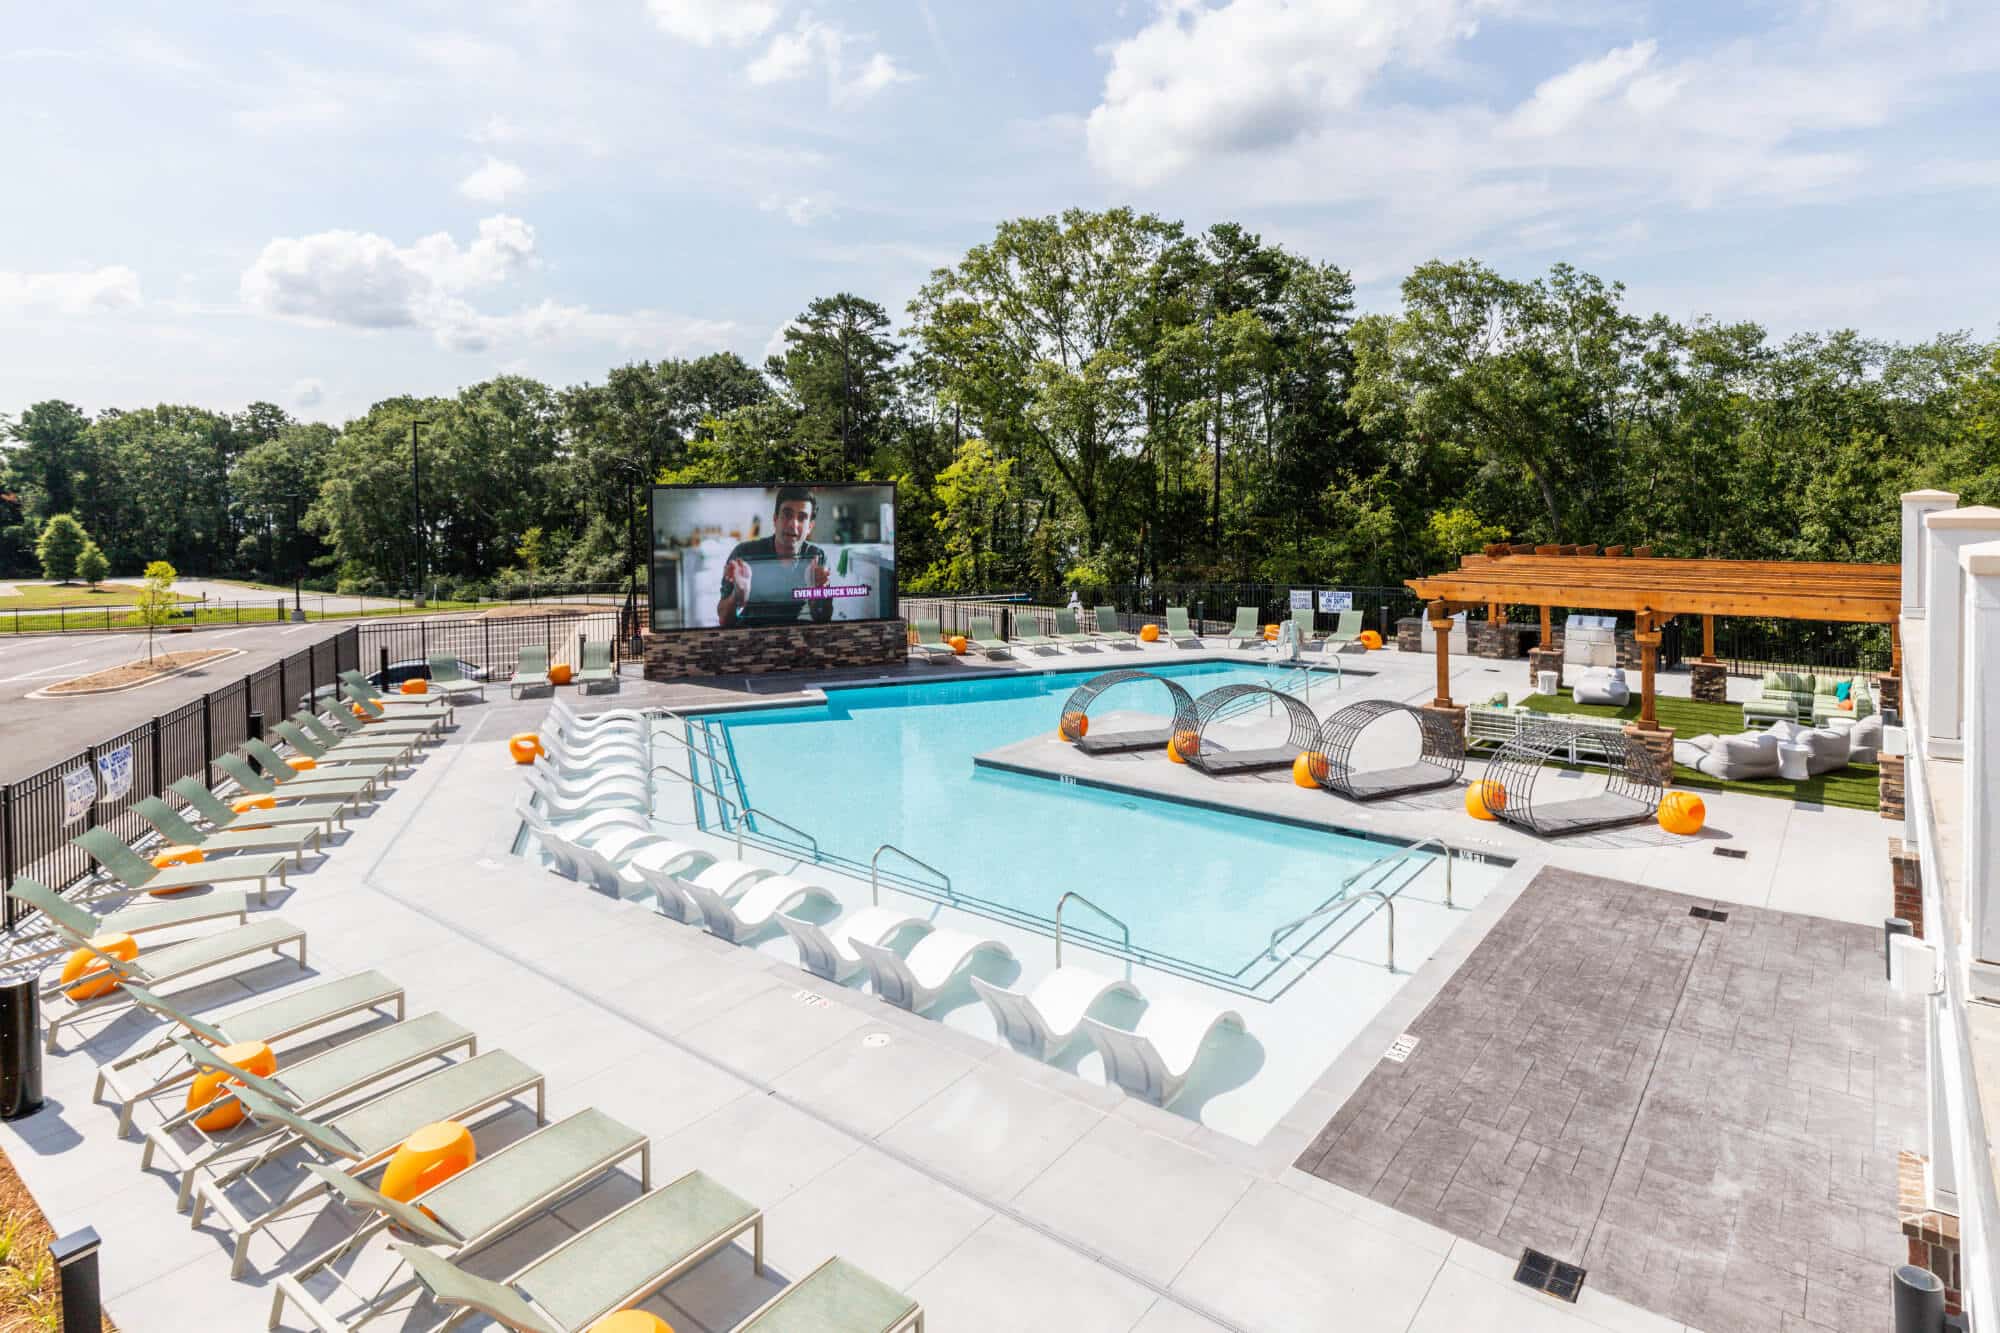 signature hartwell village off campus apartments near clemson university resort style pool with jumbotron and lounge seating